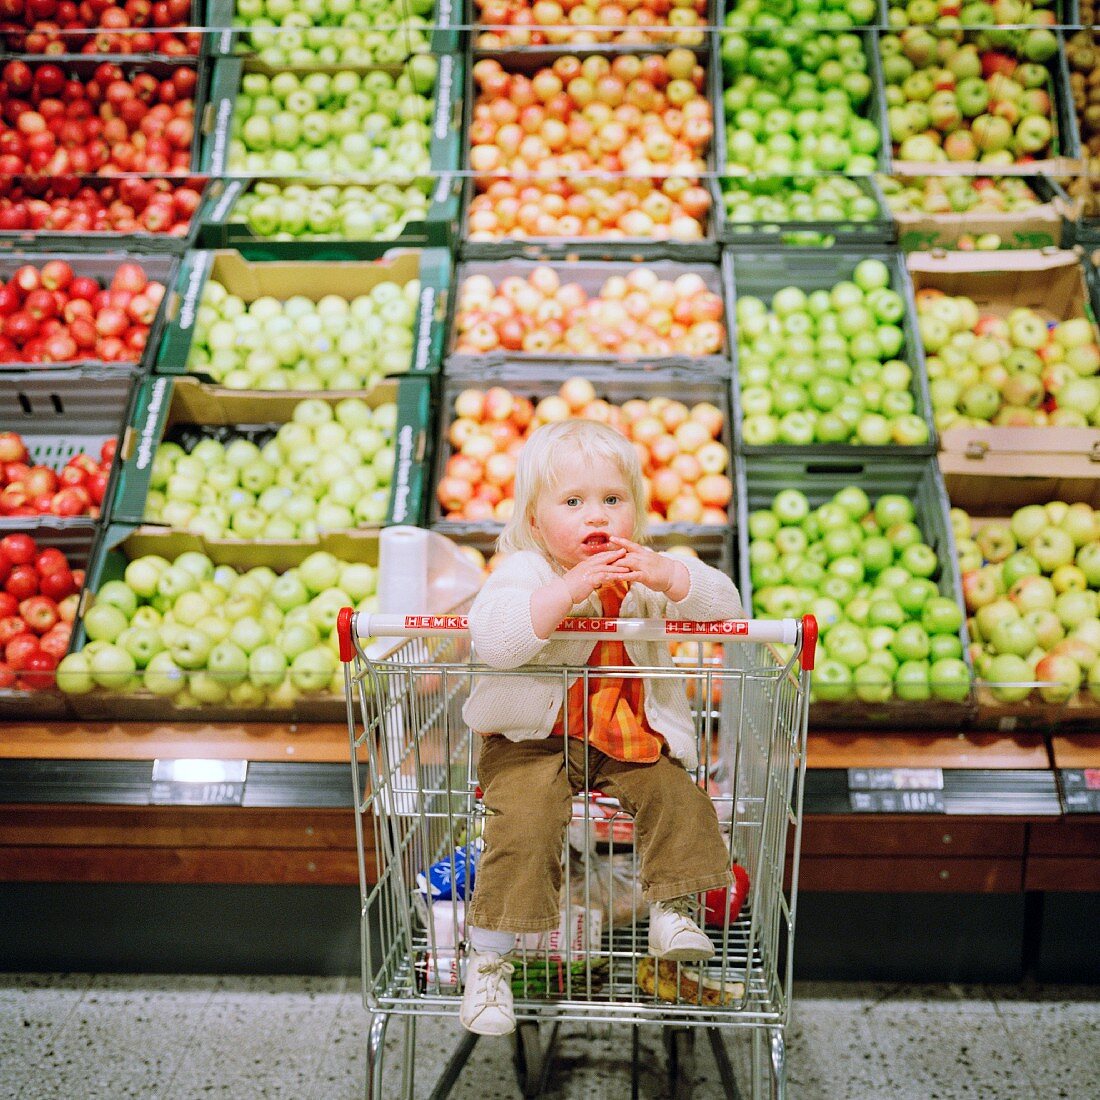 A small boy in a shopping trolley in front of a large display of apples